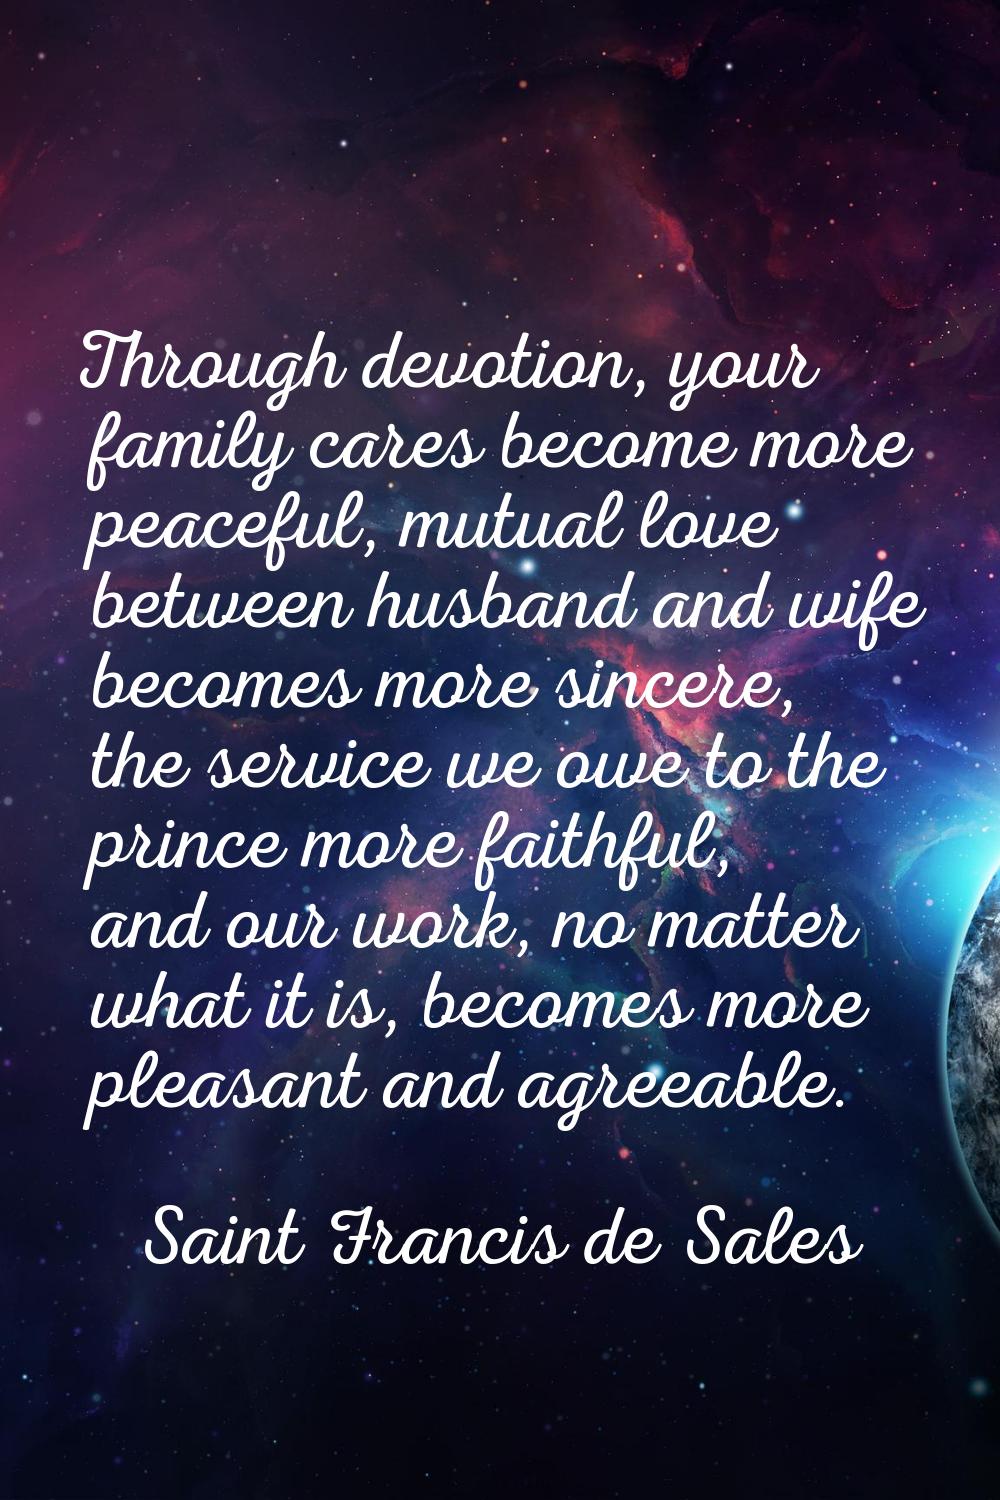 Through devotion, your family cares become more peaceful, mutual love between husband and wife beco